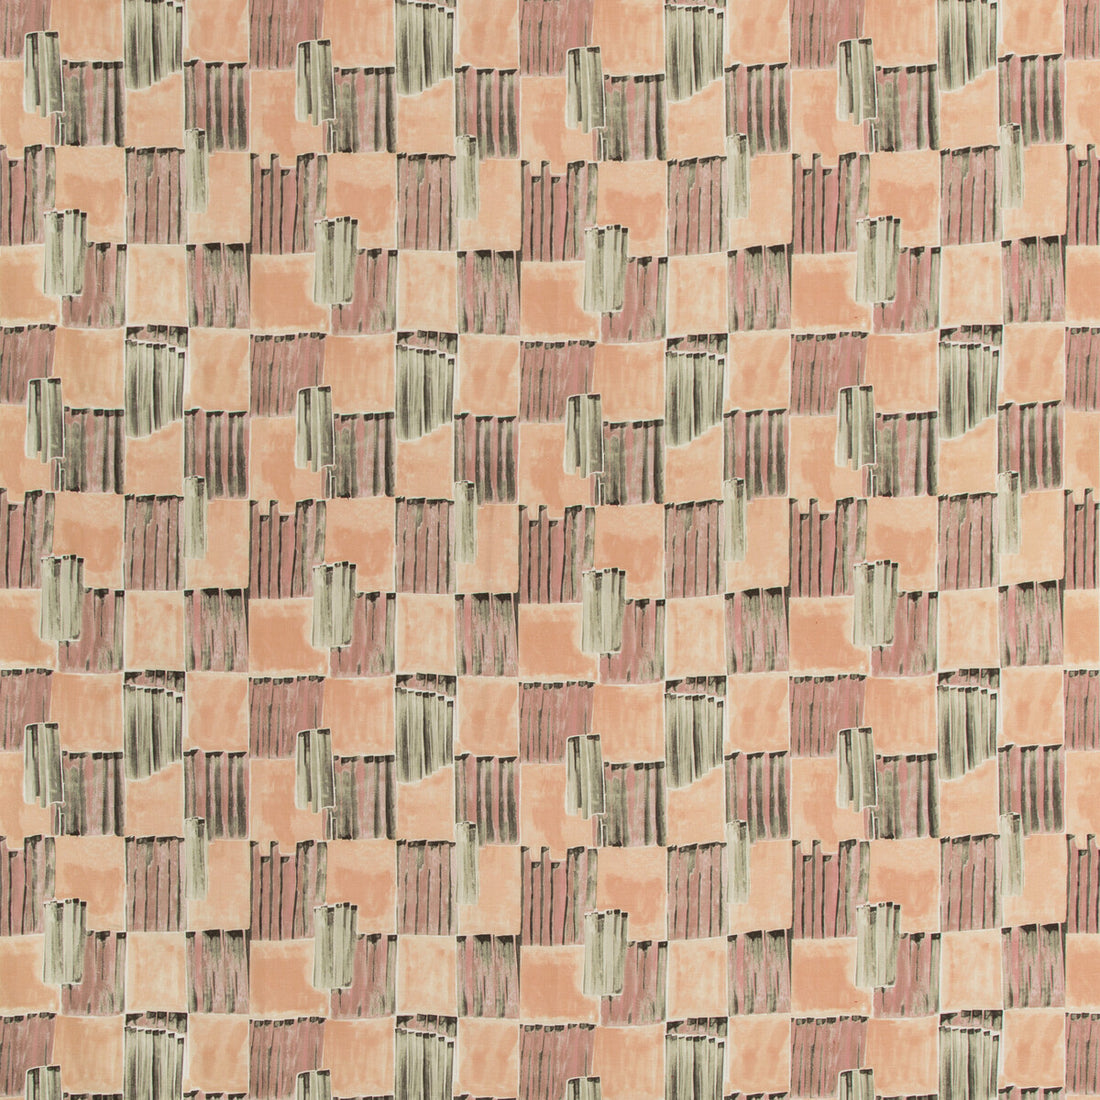 Lyre fabric in blushing color - pattern GWF-3753.117.0 - by Lee Jofa Modern in the Kelly Wearstler V collection